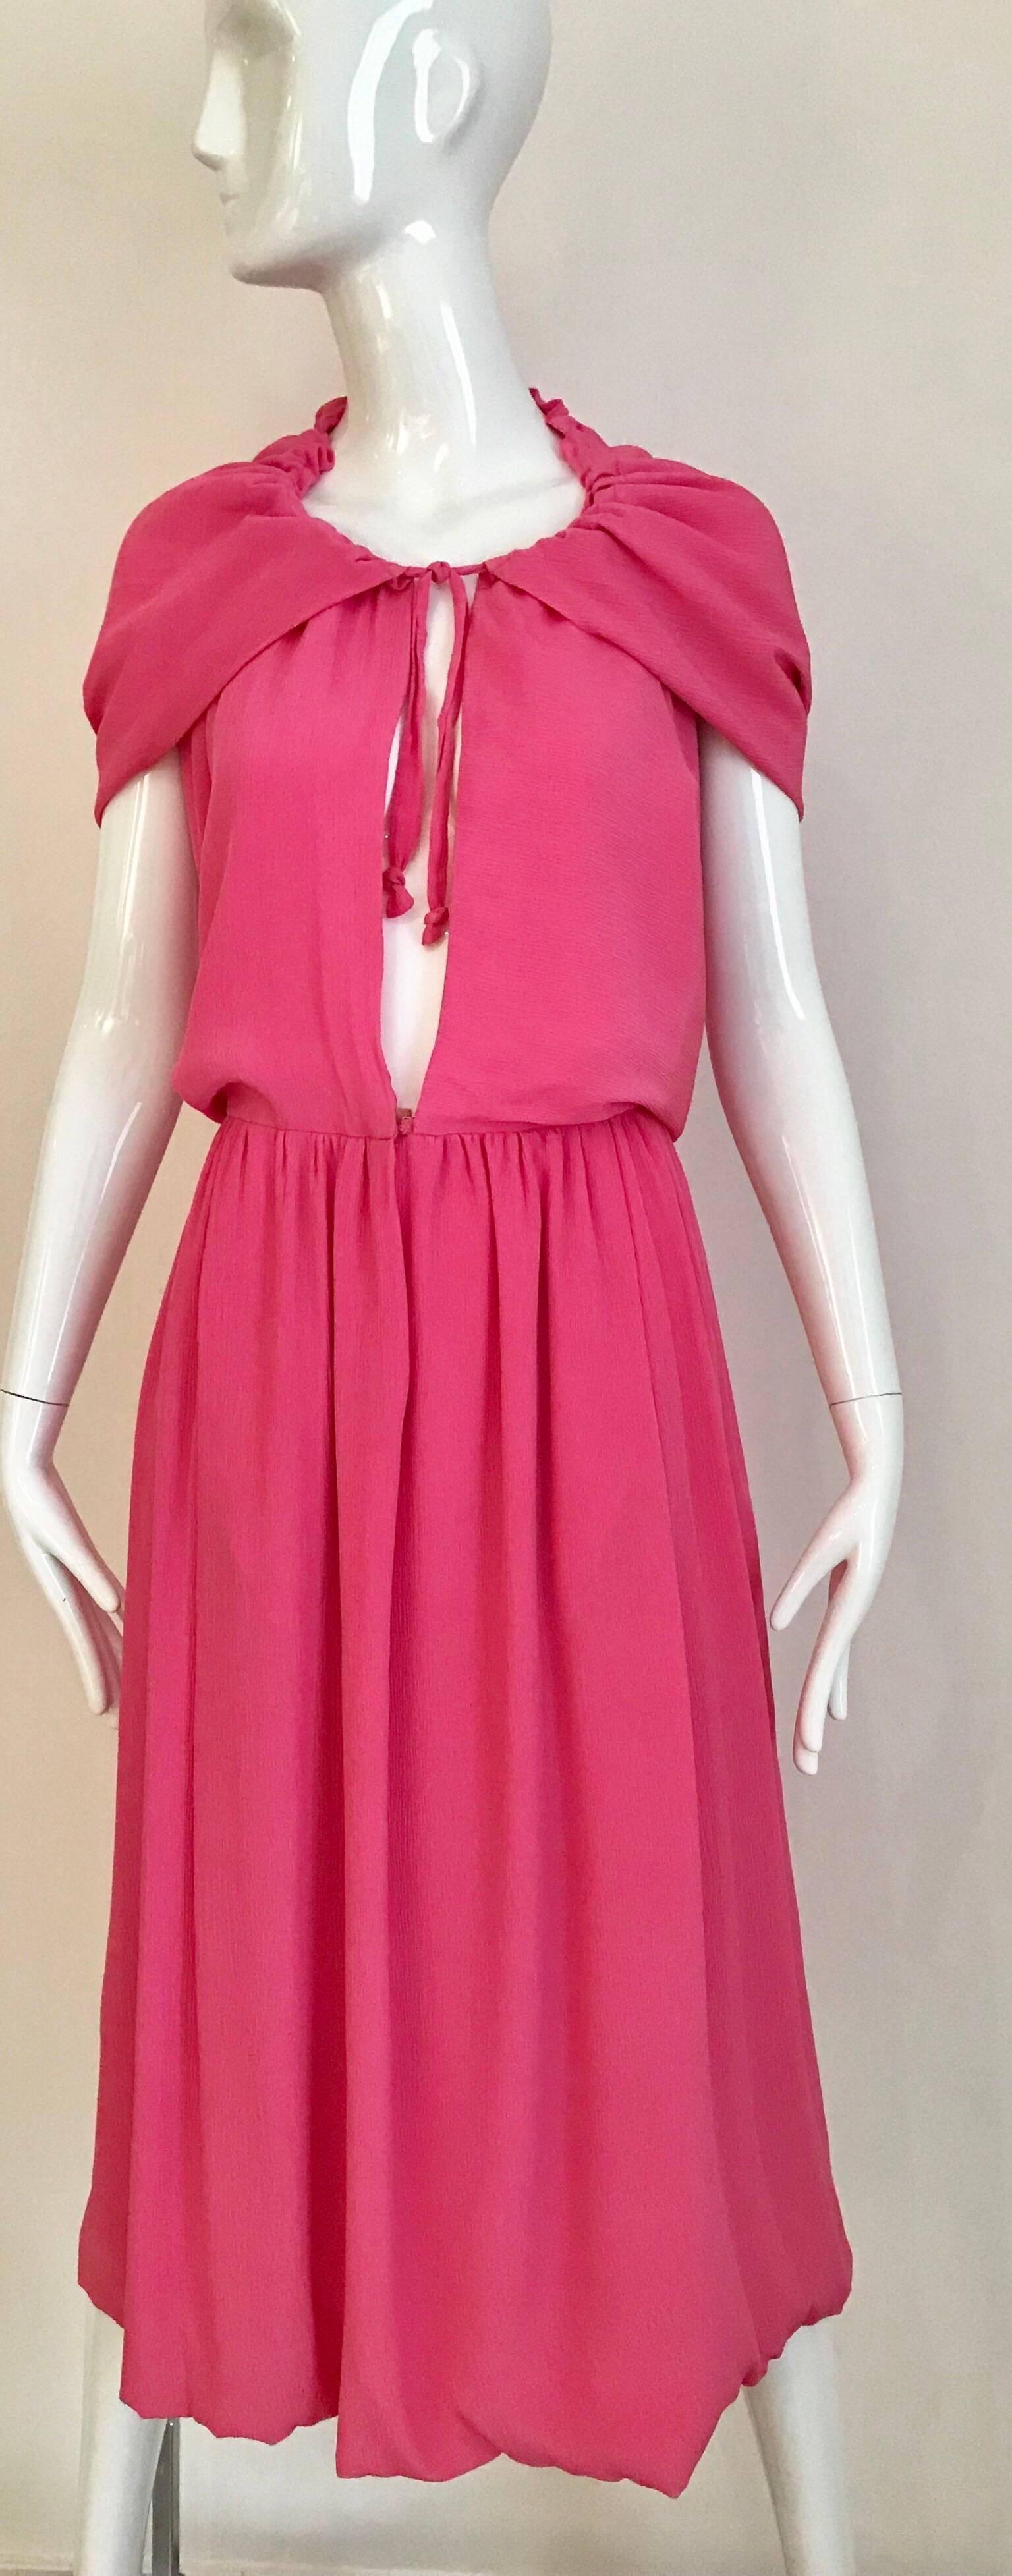 1970s Pink Crepe De Chine Summer Cocktial Dress with hood 2